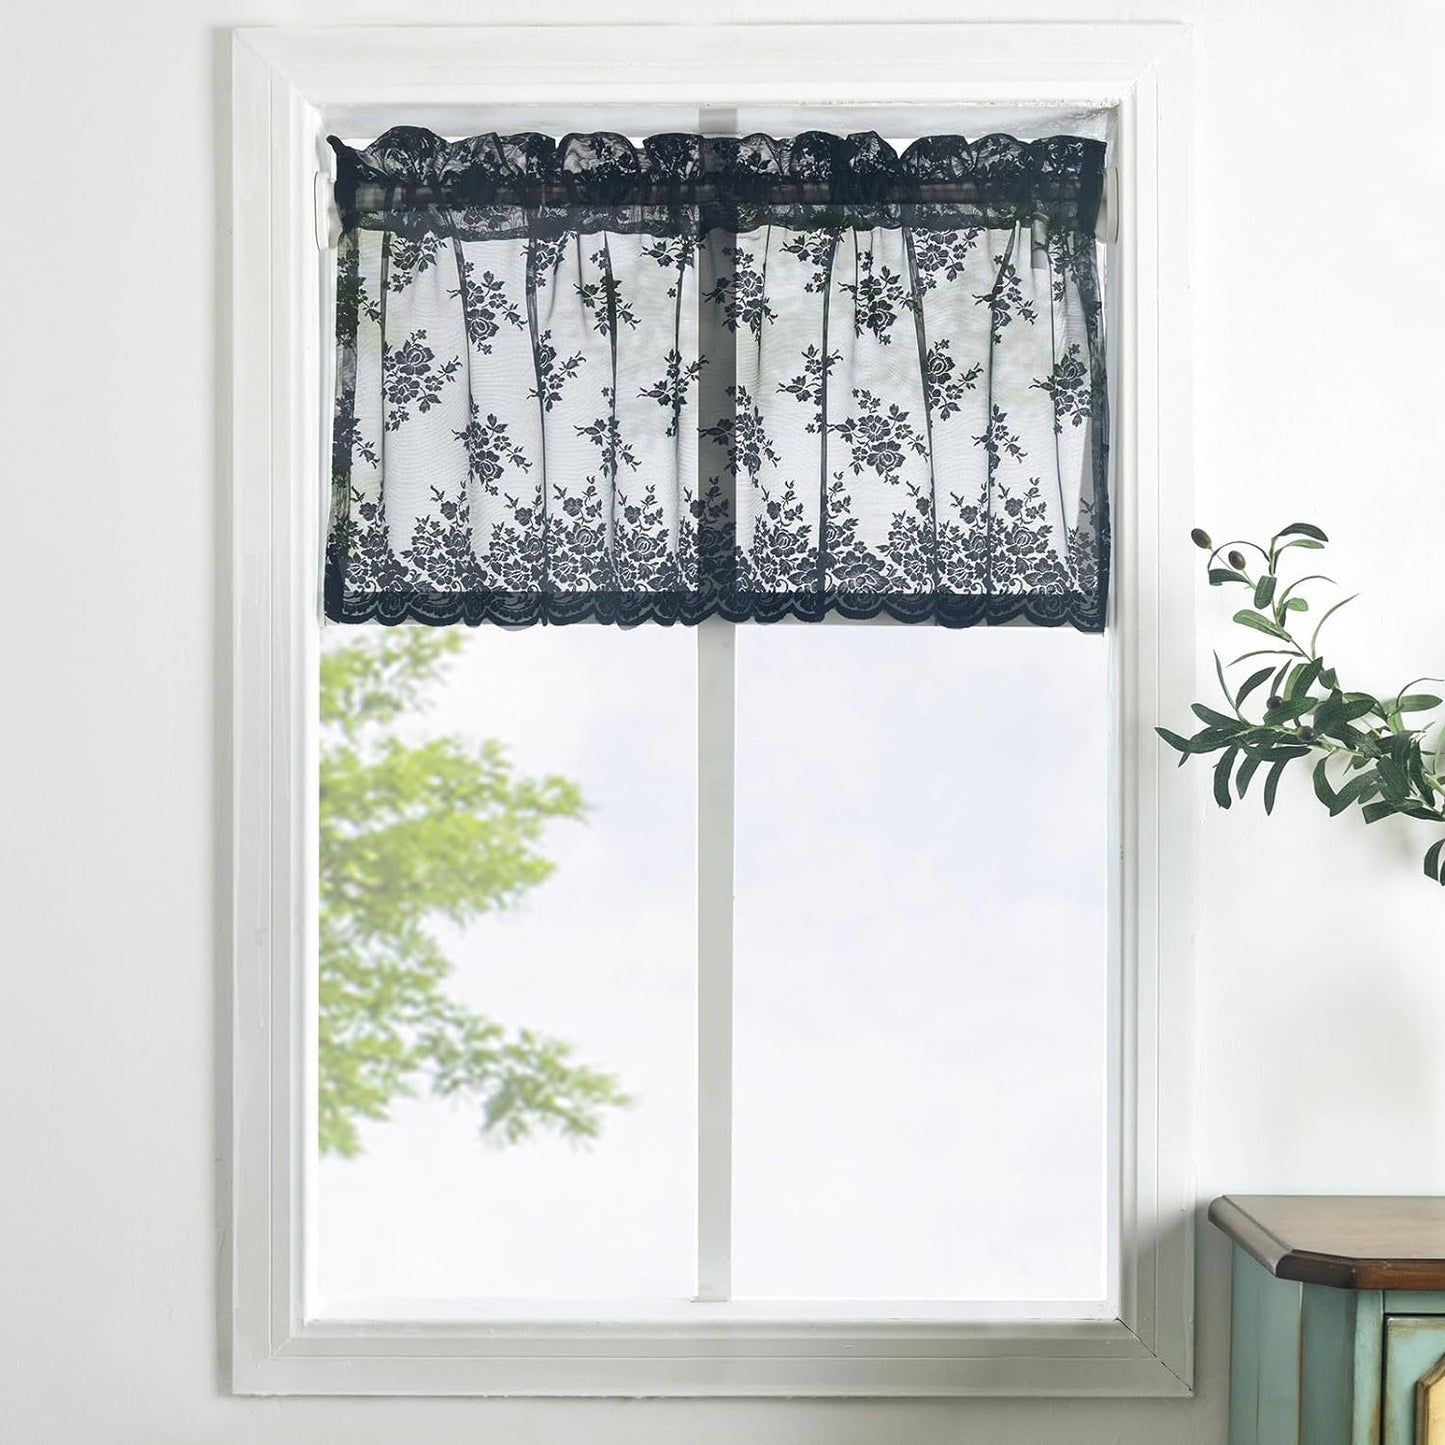 Kotile Sage Green Sheer Valance Curtain for Windows, Rustic Floral Spring Sheer Window Valance Curtain 18 Inch Length, Light Filtering Rod Pocket Lace Valance, 52 X 18 Inch, 1 Panel, Sage Green  Kotile Textile Black 52 In X 18 In (W X L) 